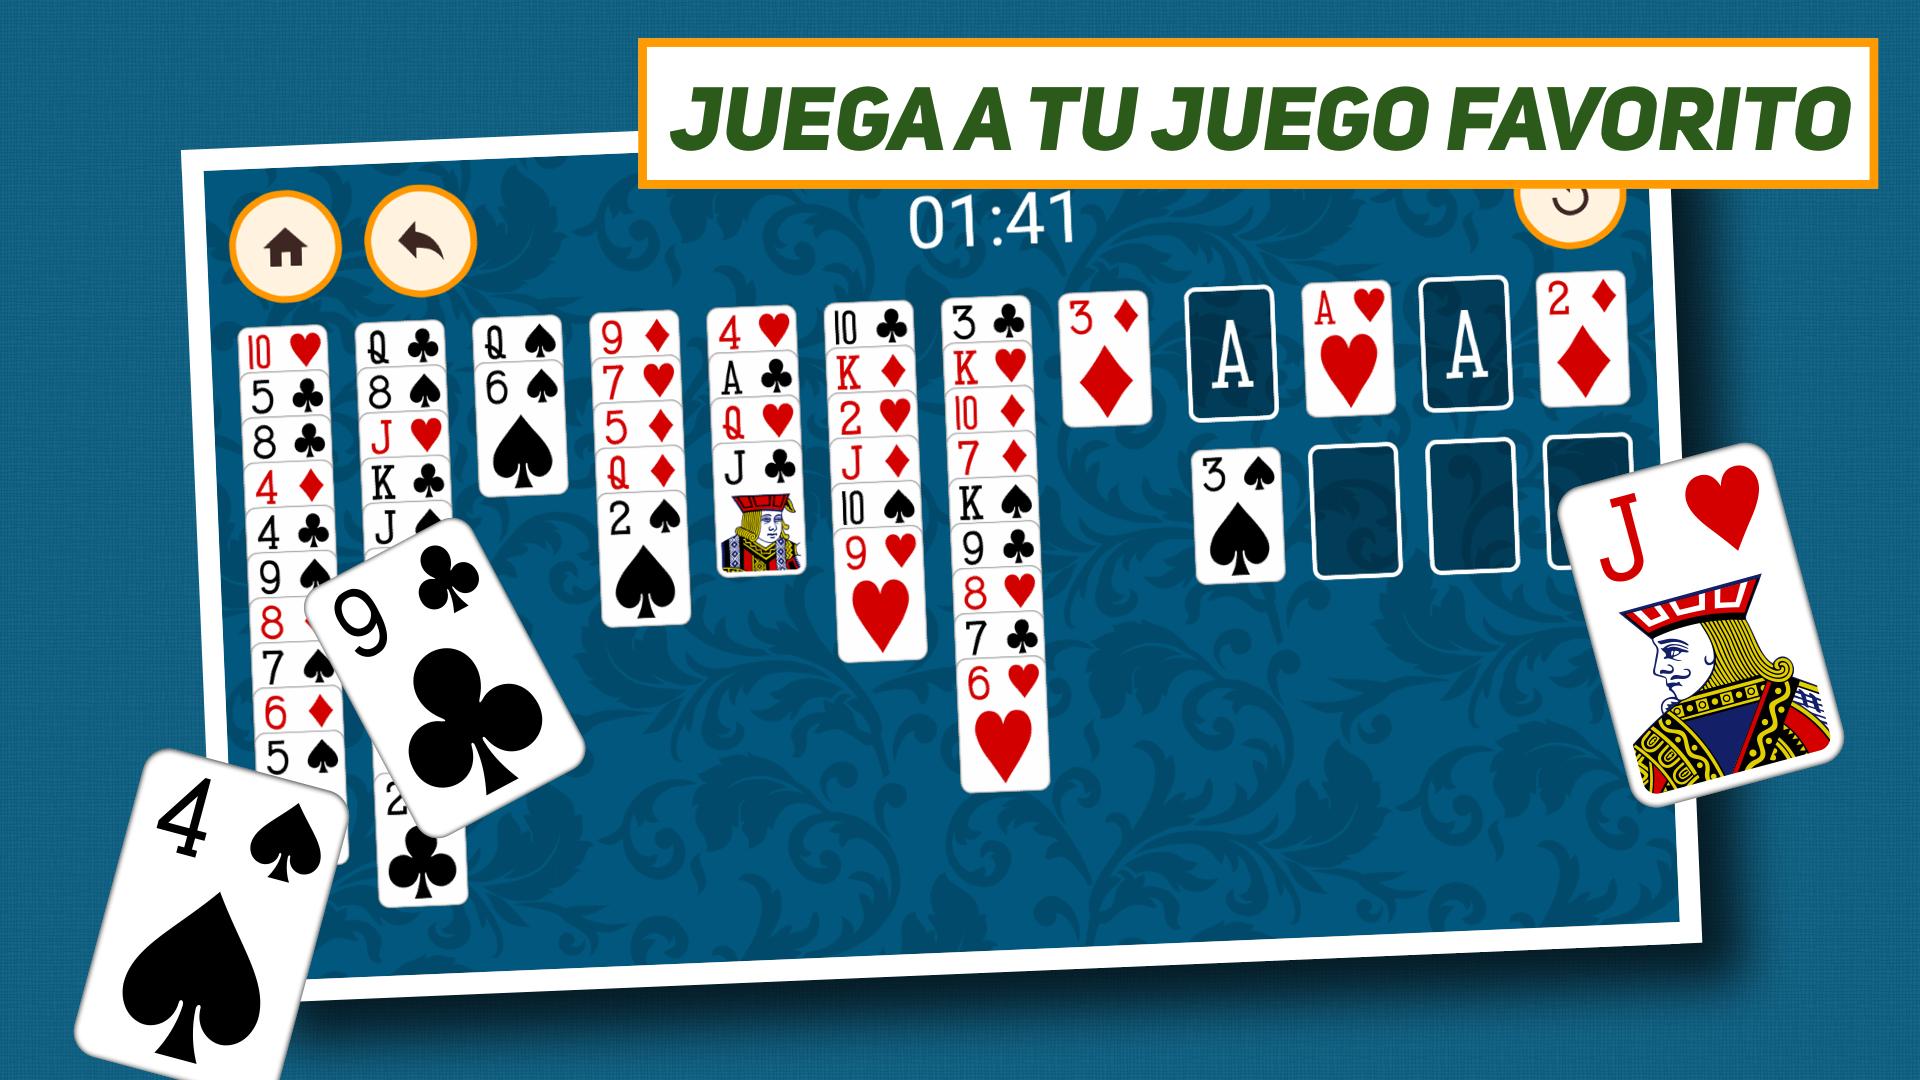 Freecell (Carta Blanca) for Android - APK Download